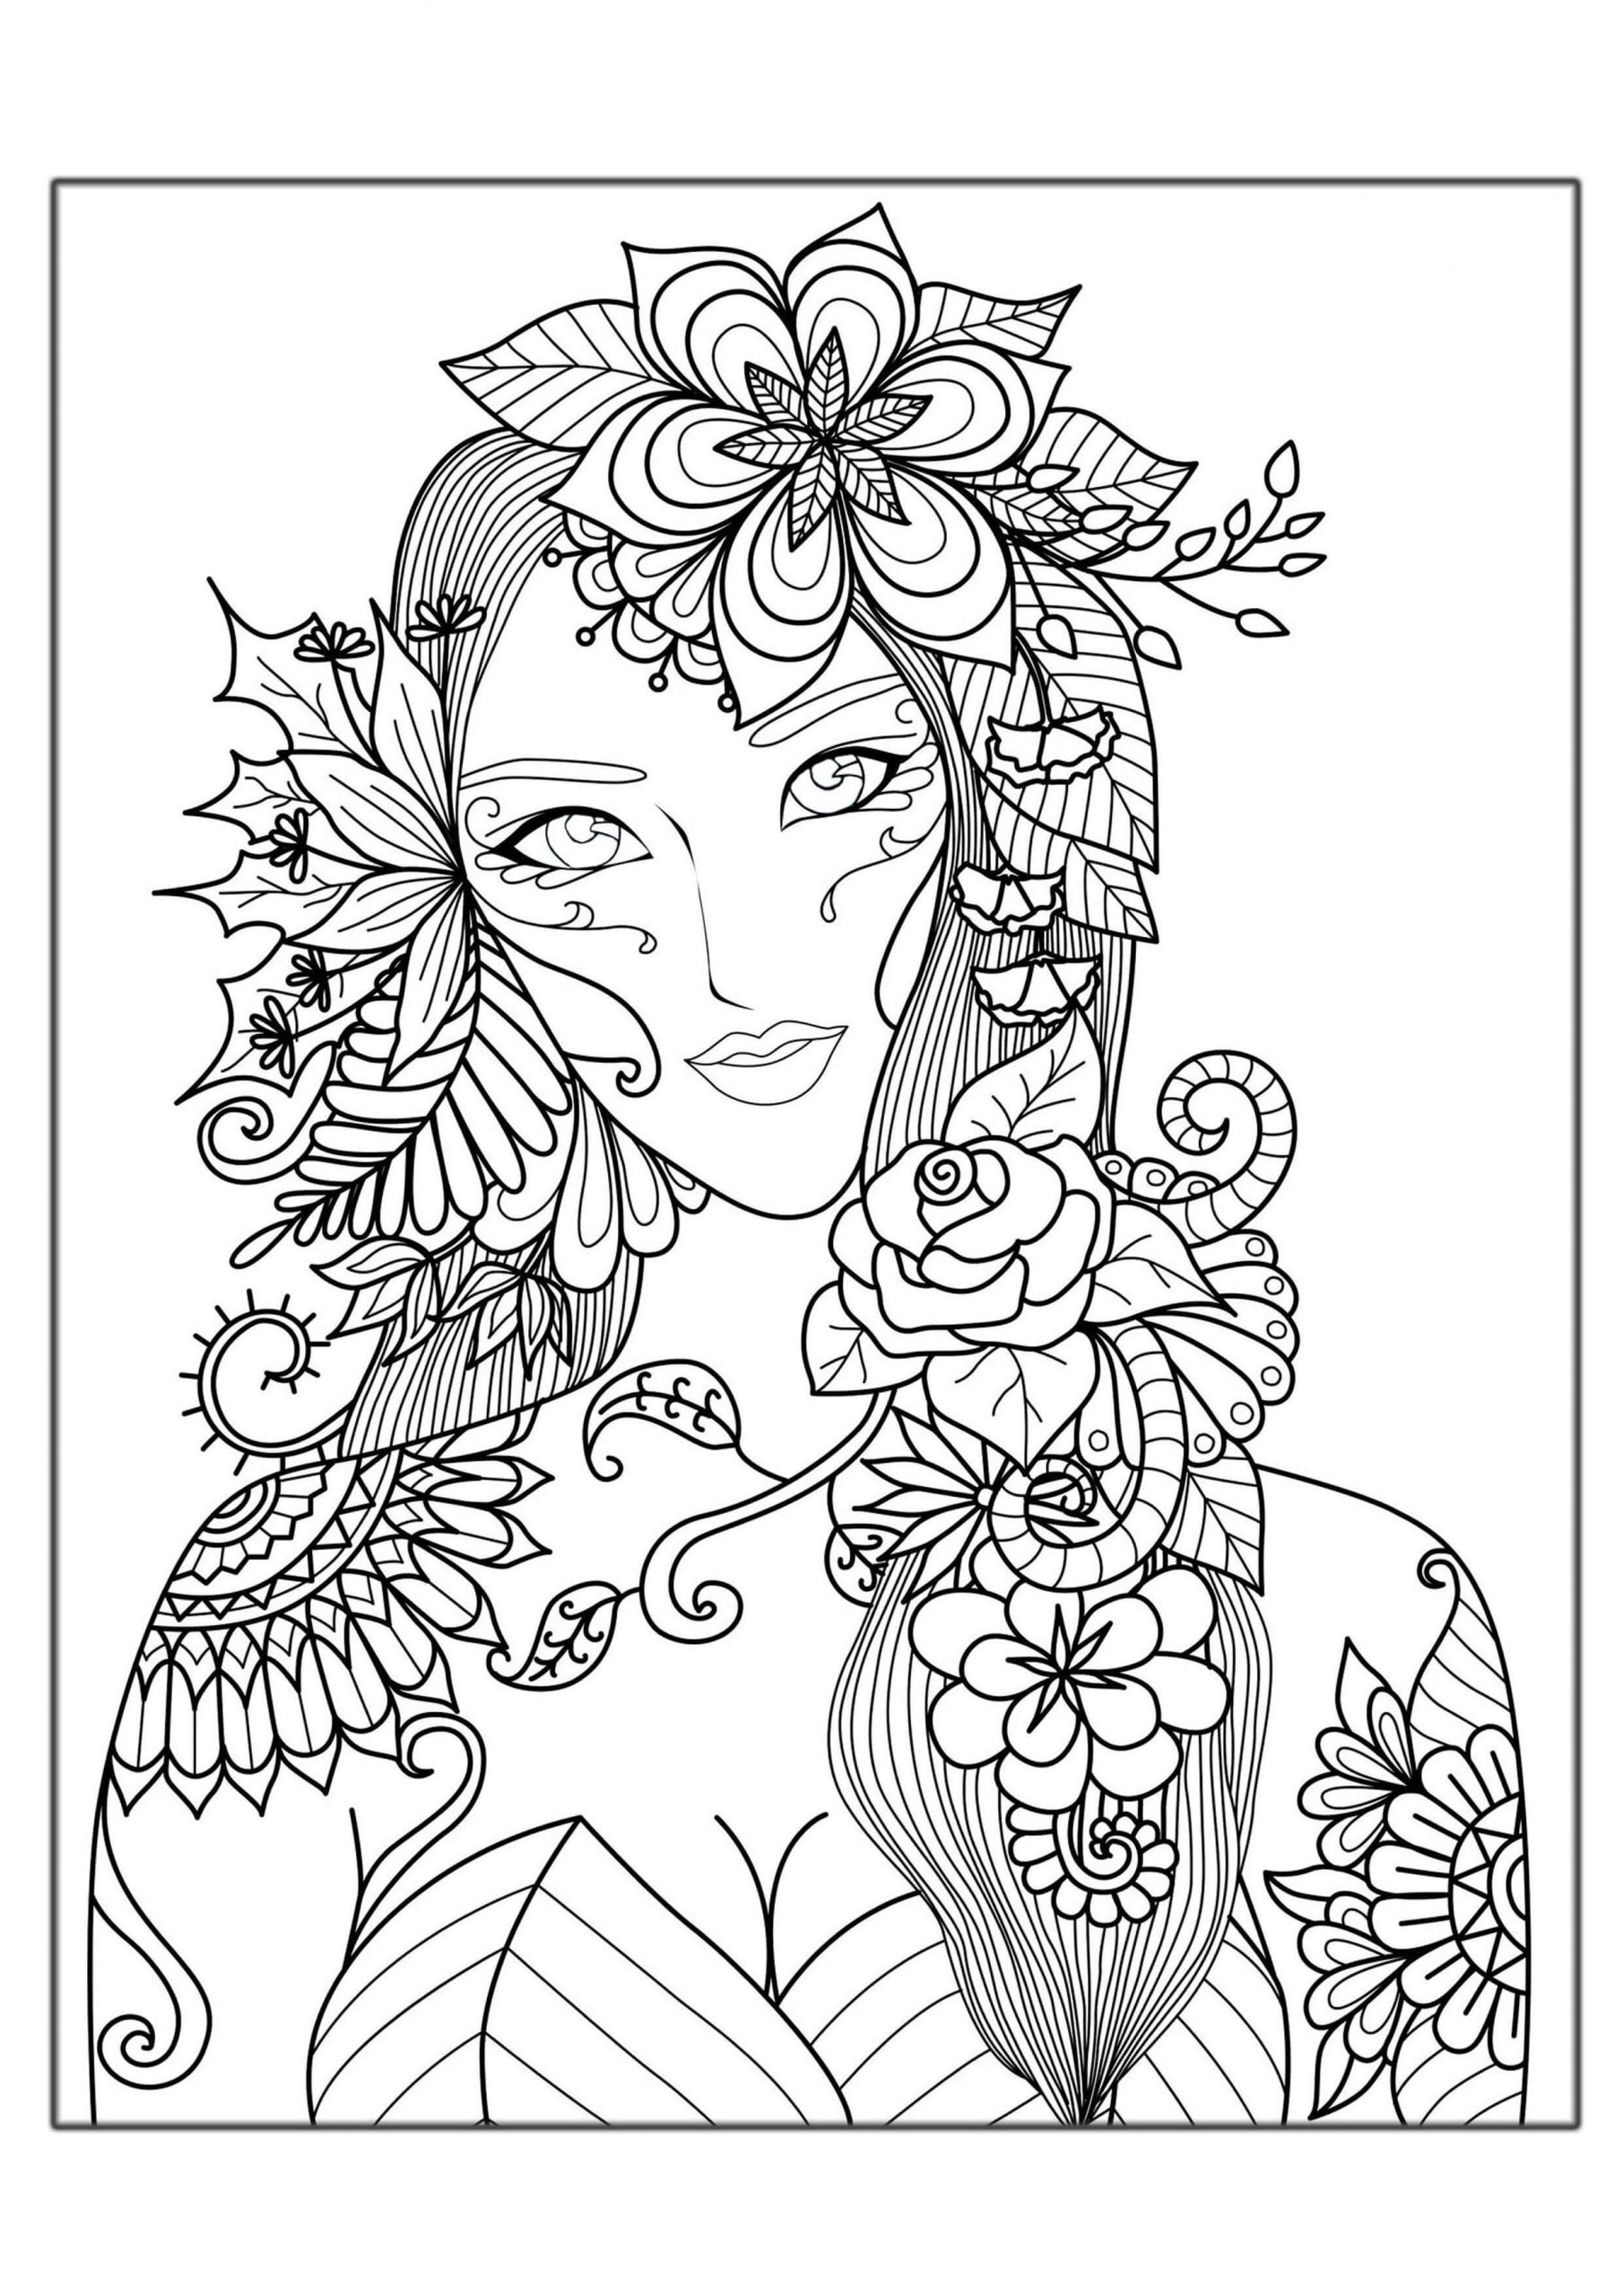 Hard Kids Coloring Pages
 Hard Coloring Pages 15